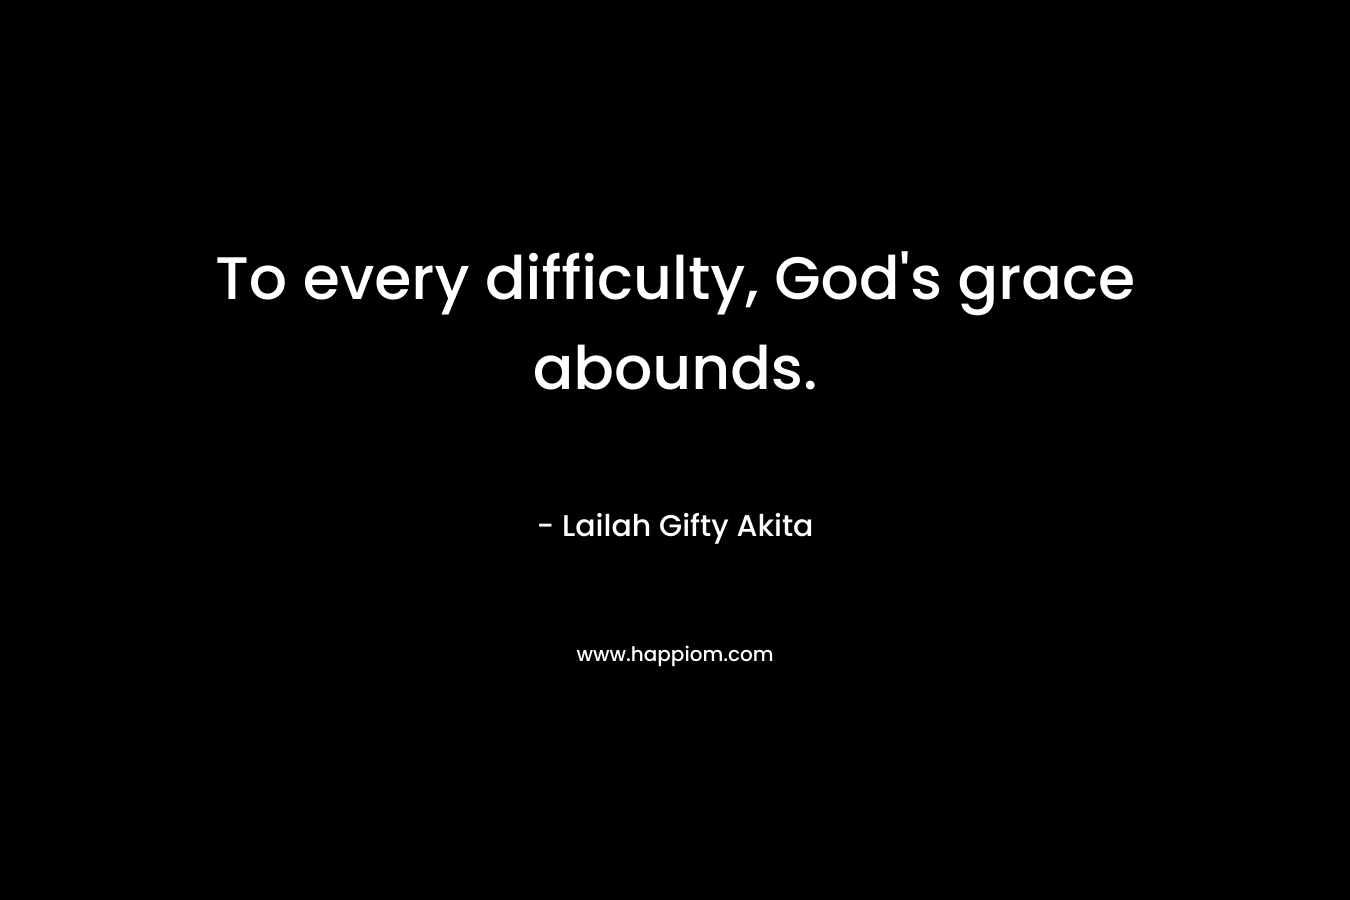 To every difficulty, God’s grace abounds. – Lailah Gifty Akita